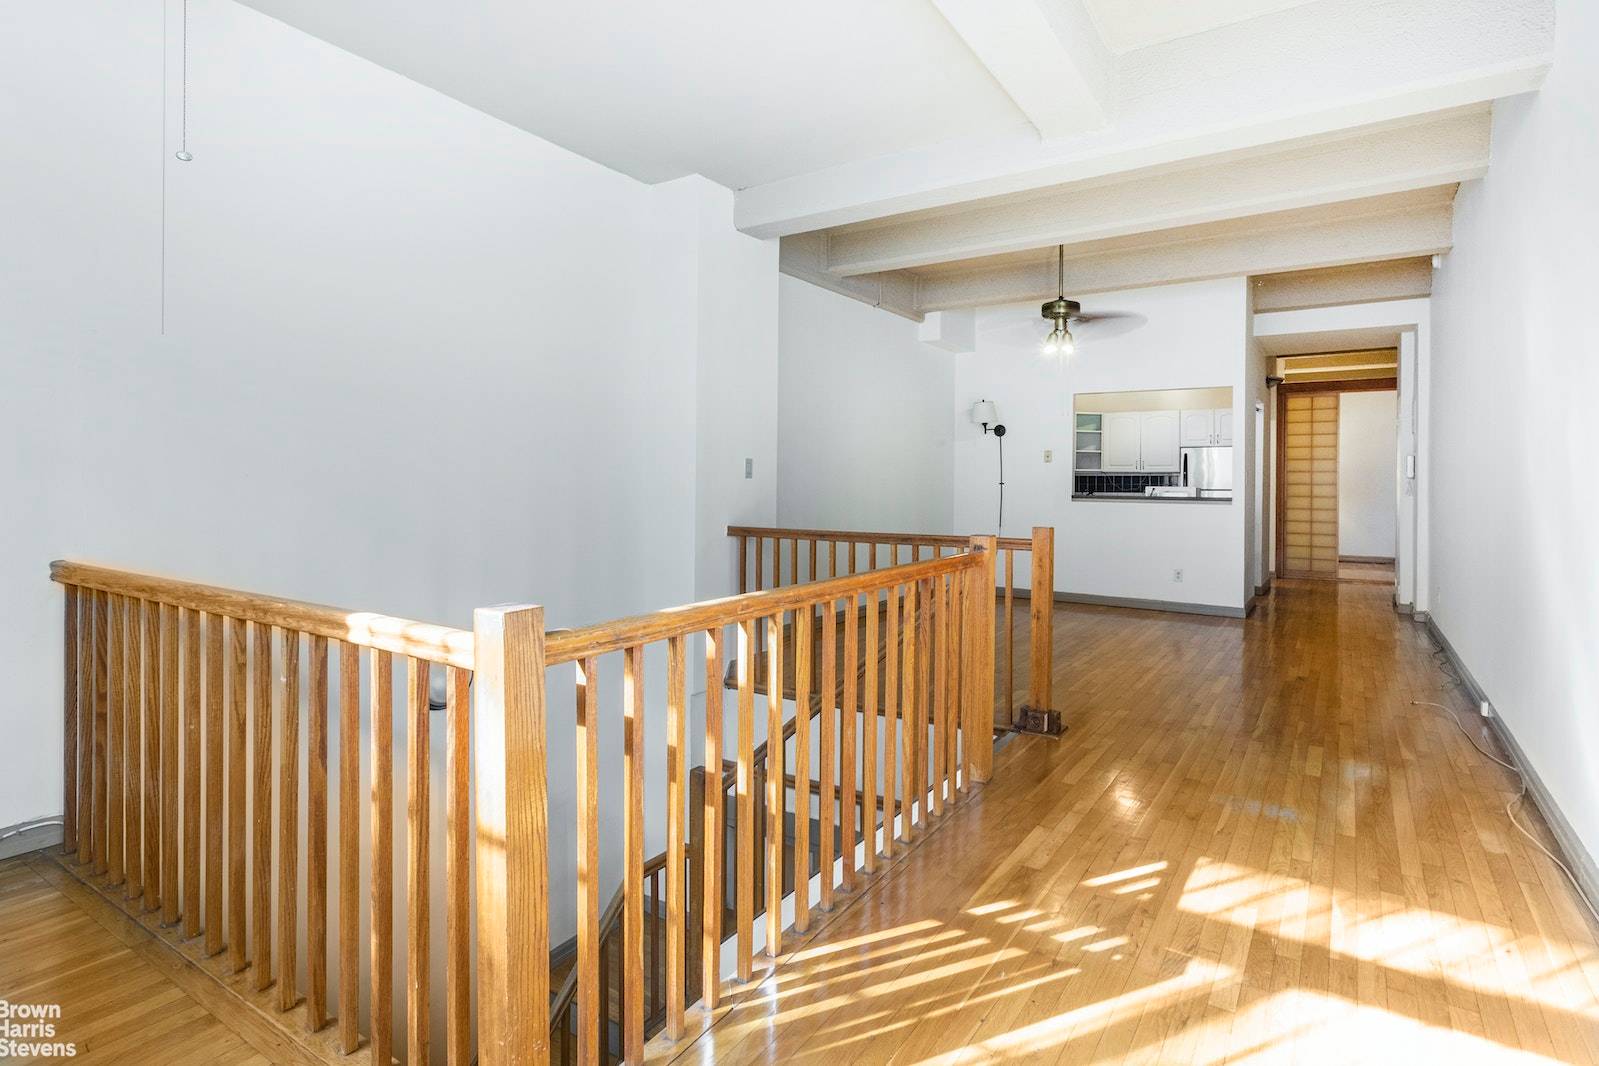 Relax in this well designed, 2Bedroom loft like condo in a very sought after elevator building in north Carroll Gardens.